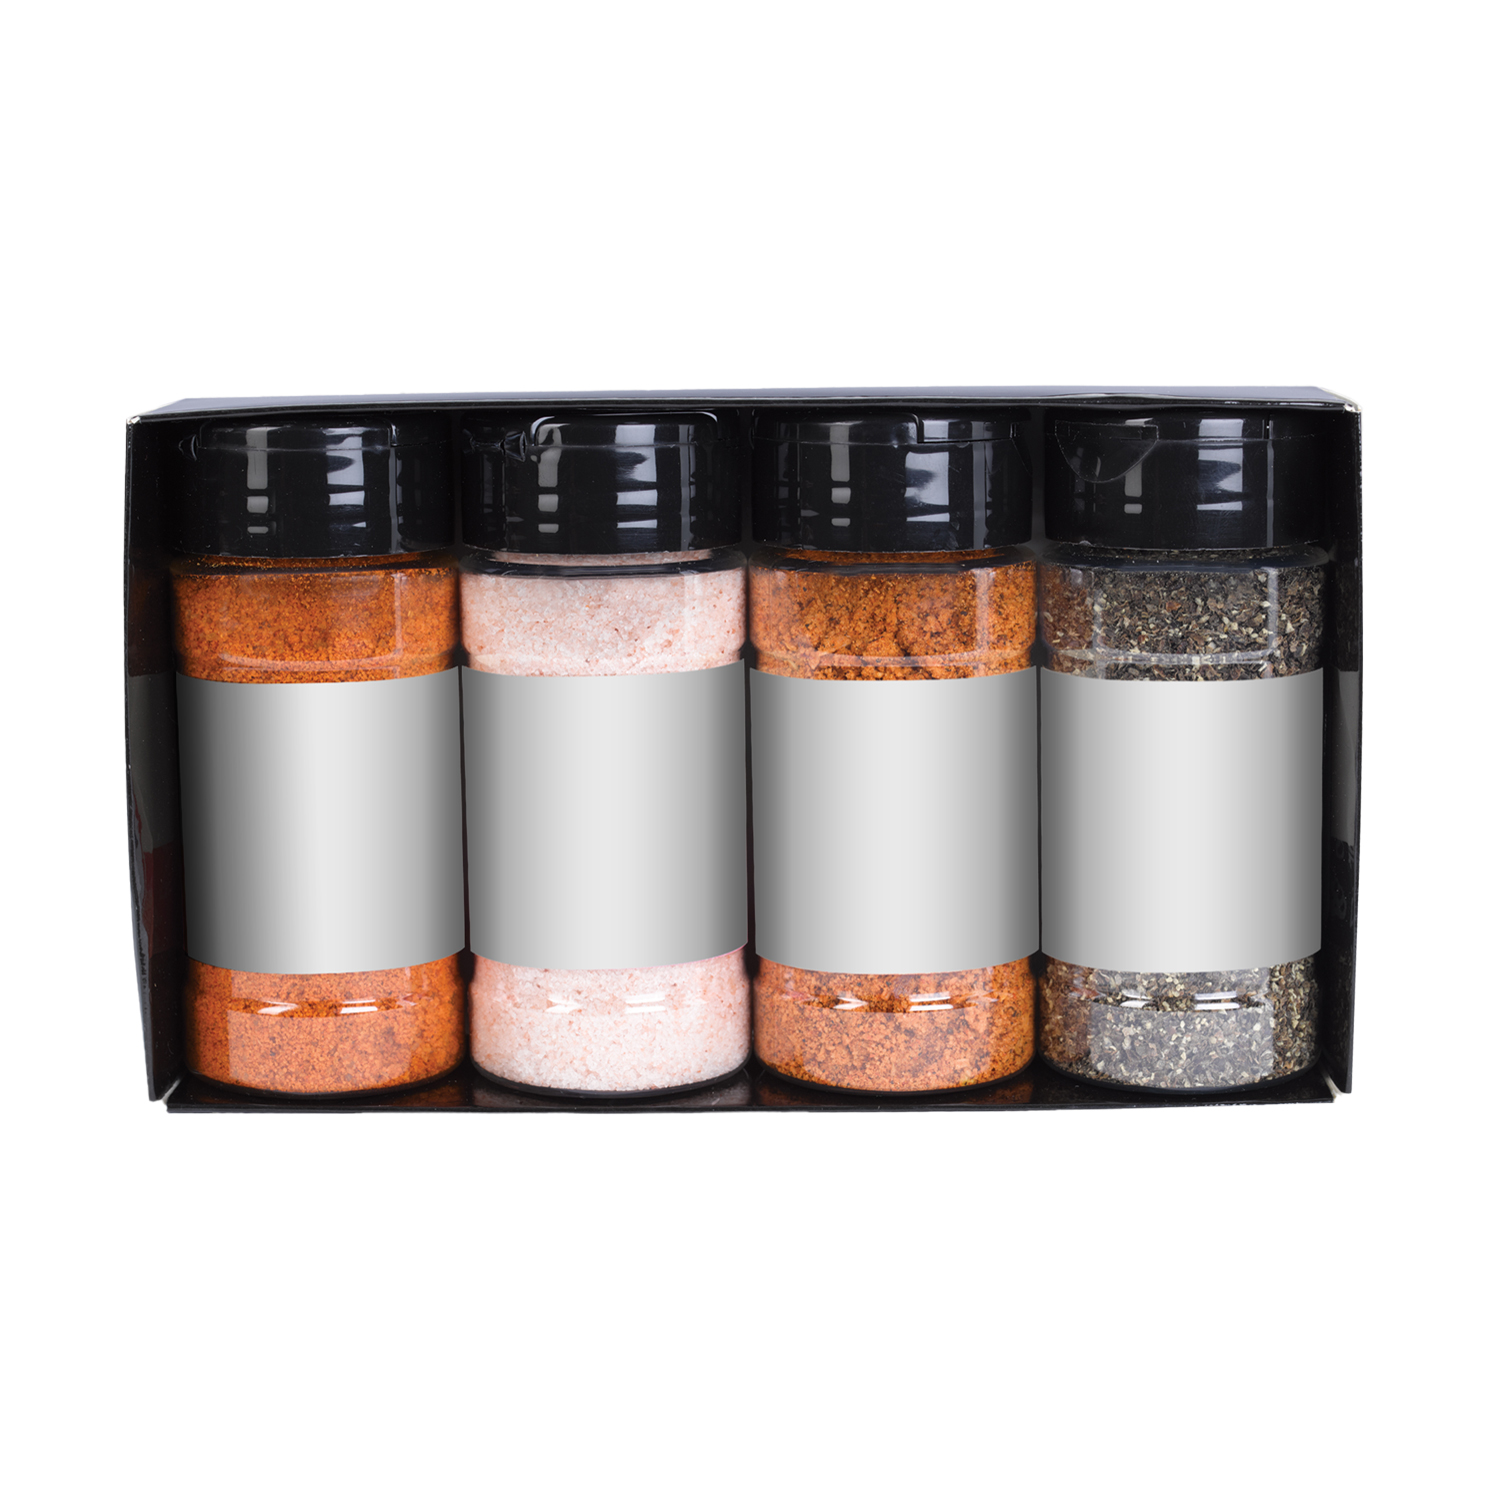 SPICE-SINGLE Gourmet Spice and Rub Bottle Shaker - Hit Promotional